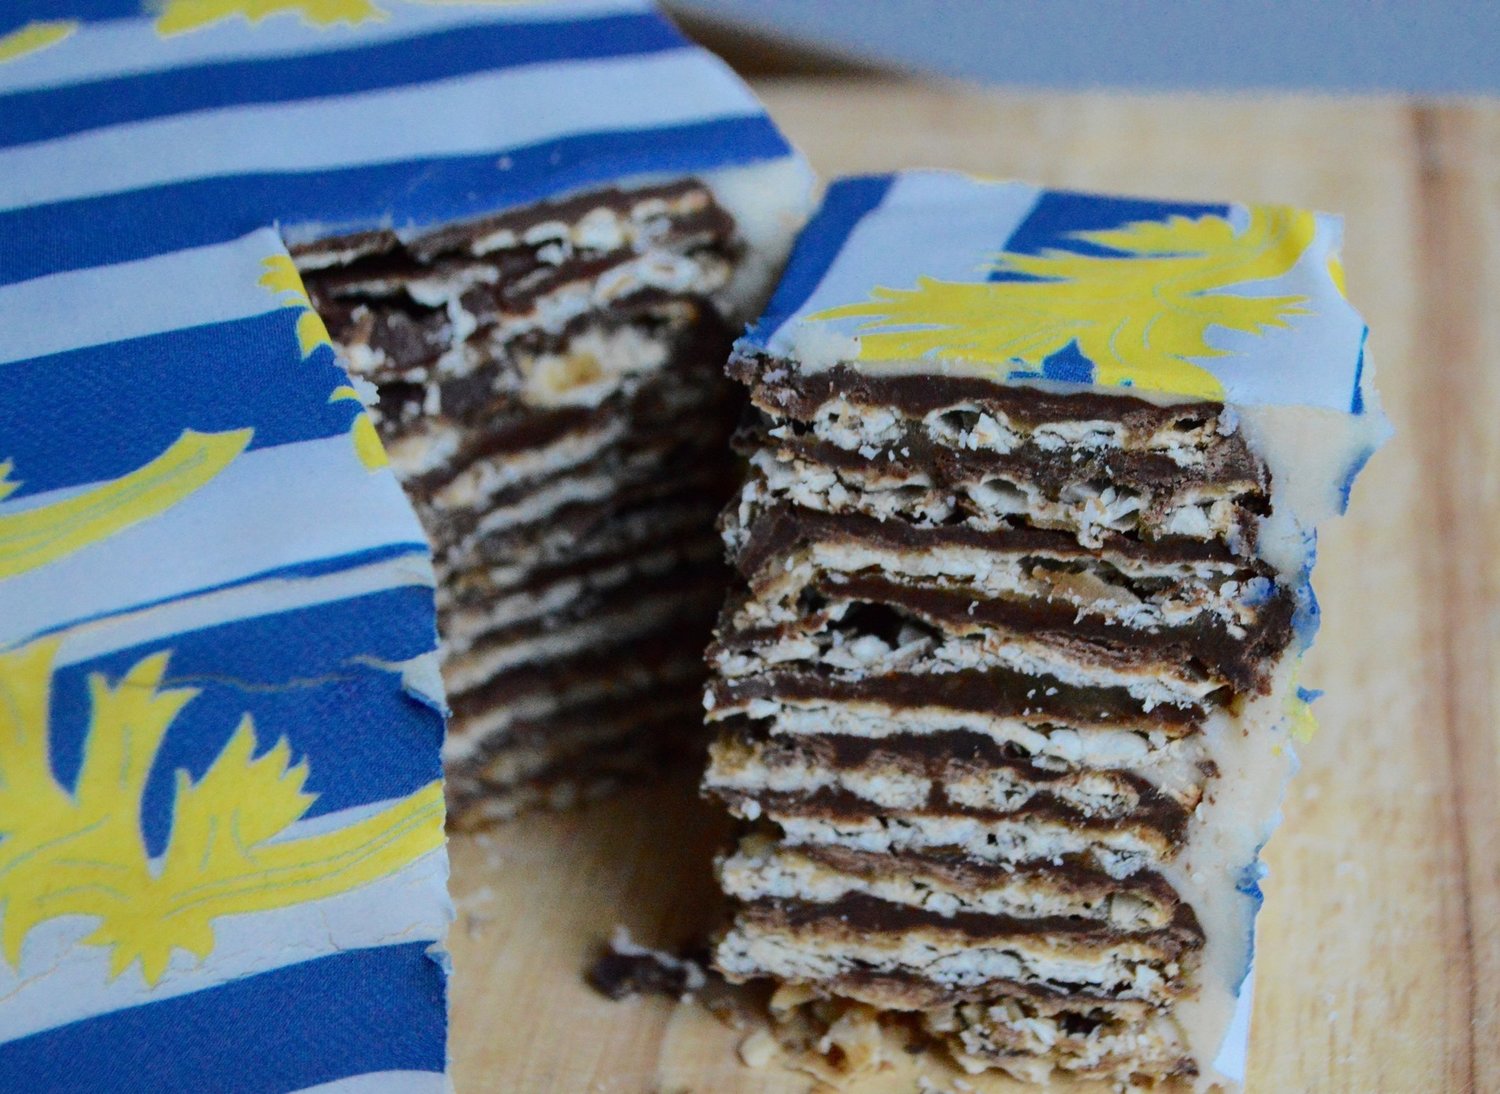 Matzah Crack Cake with Layers of Chocolate and Chefanie Sheets